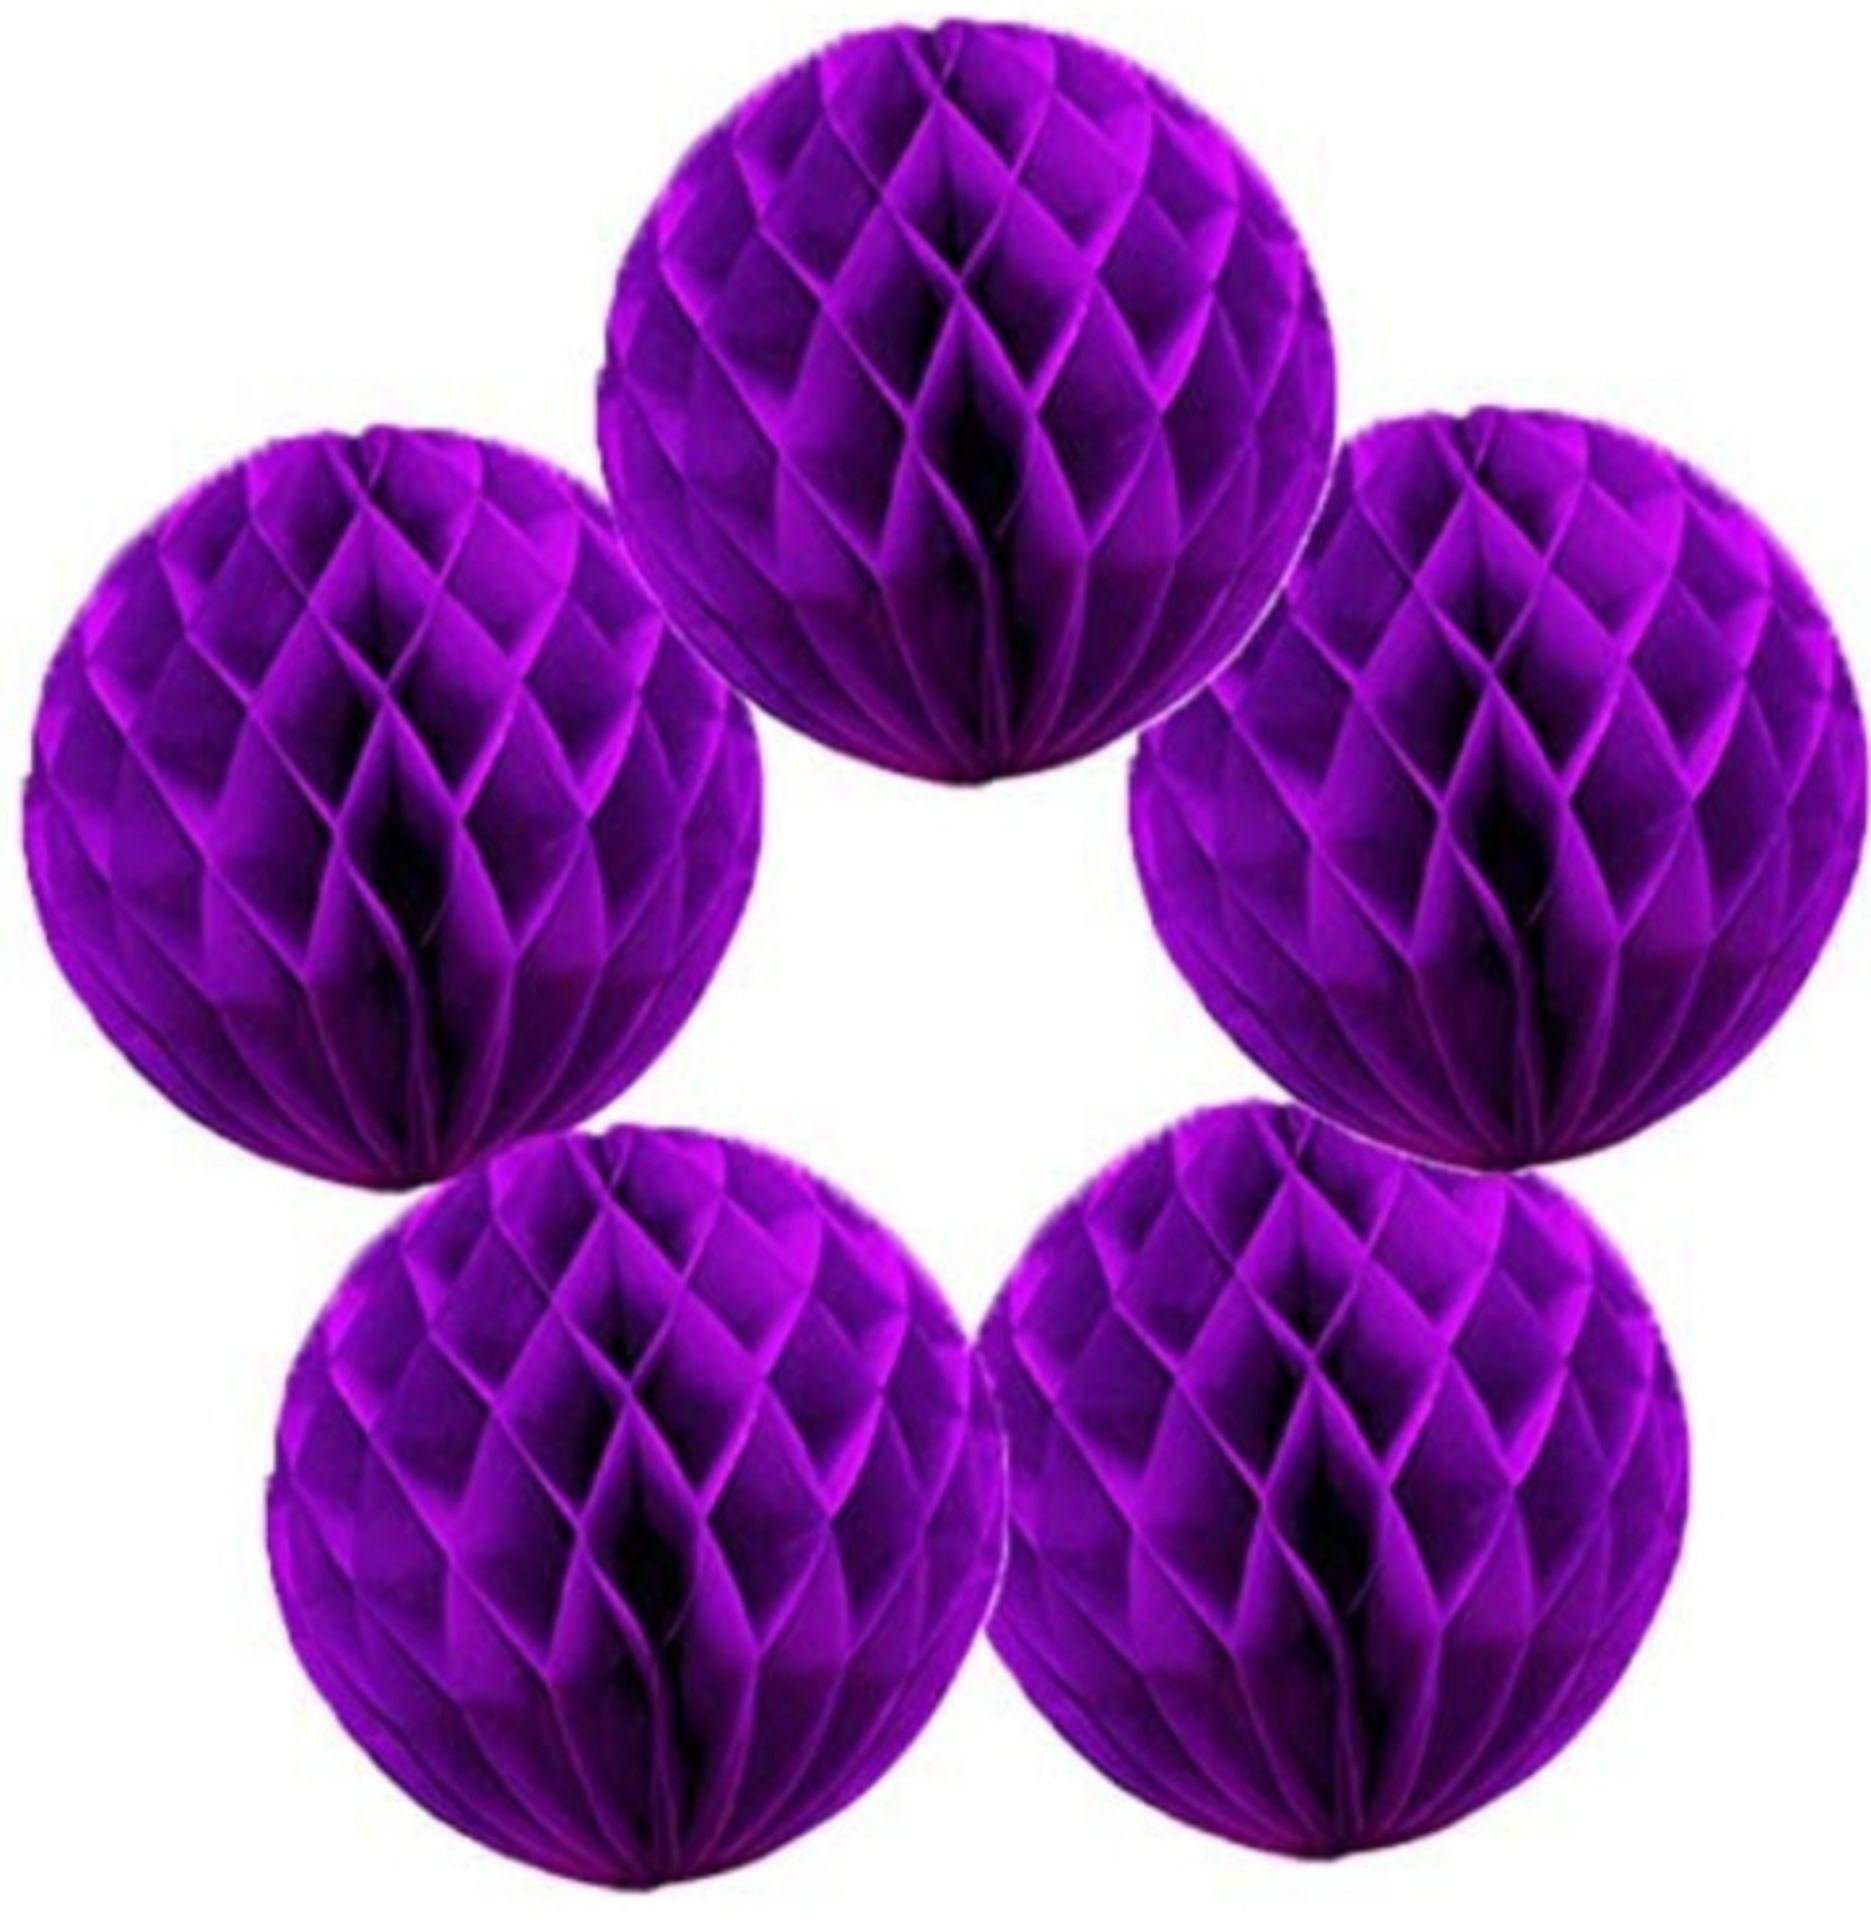 X 60 BRAND NEW 25CM PURPLE PAPER HONEYCOMB BALLS FOR WEDDING, BIRTHDAY, AND FESTIVAL PARTY